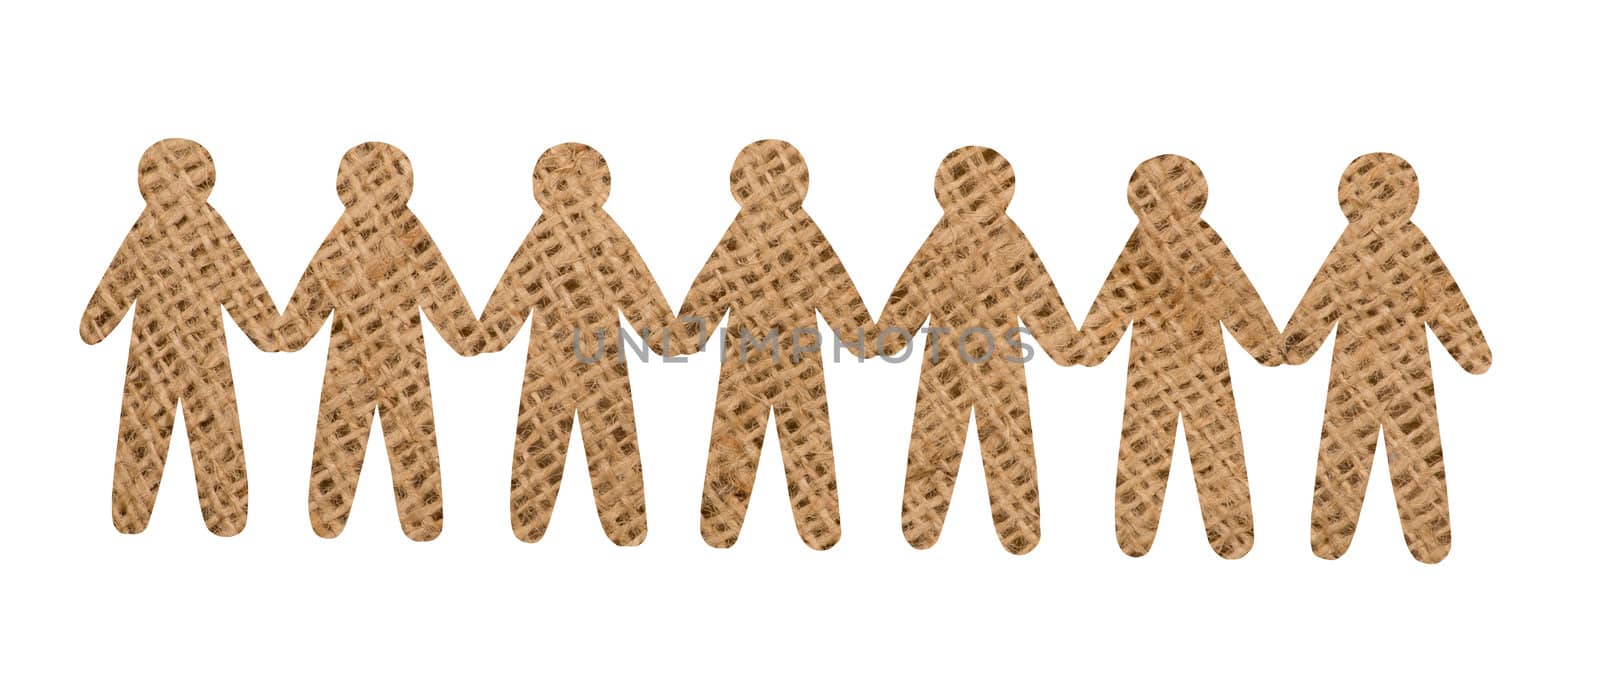 team of burlap people on white background